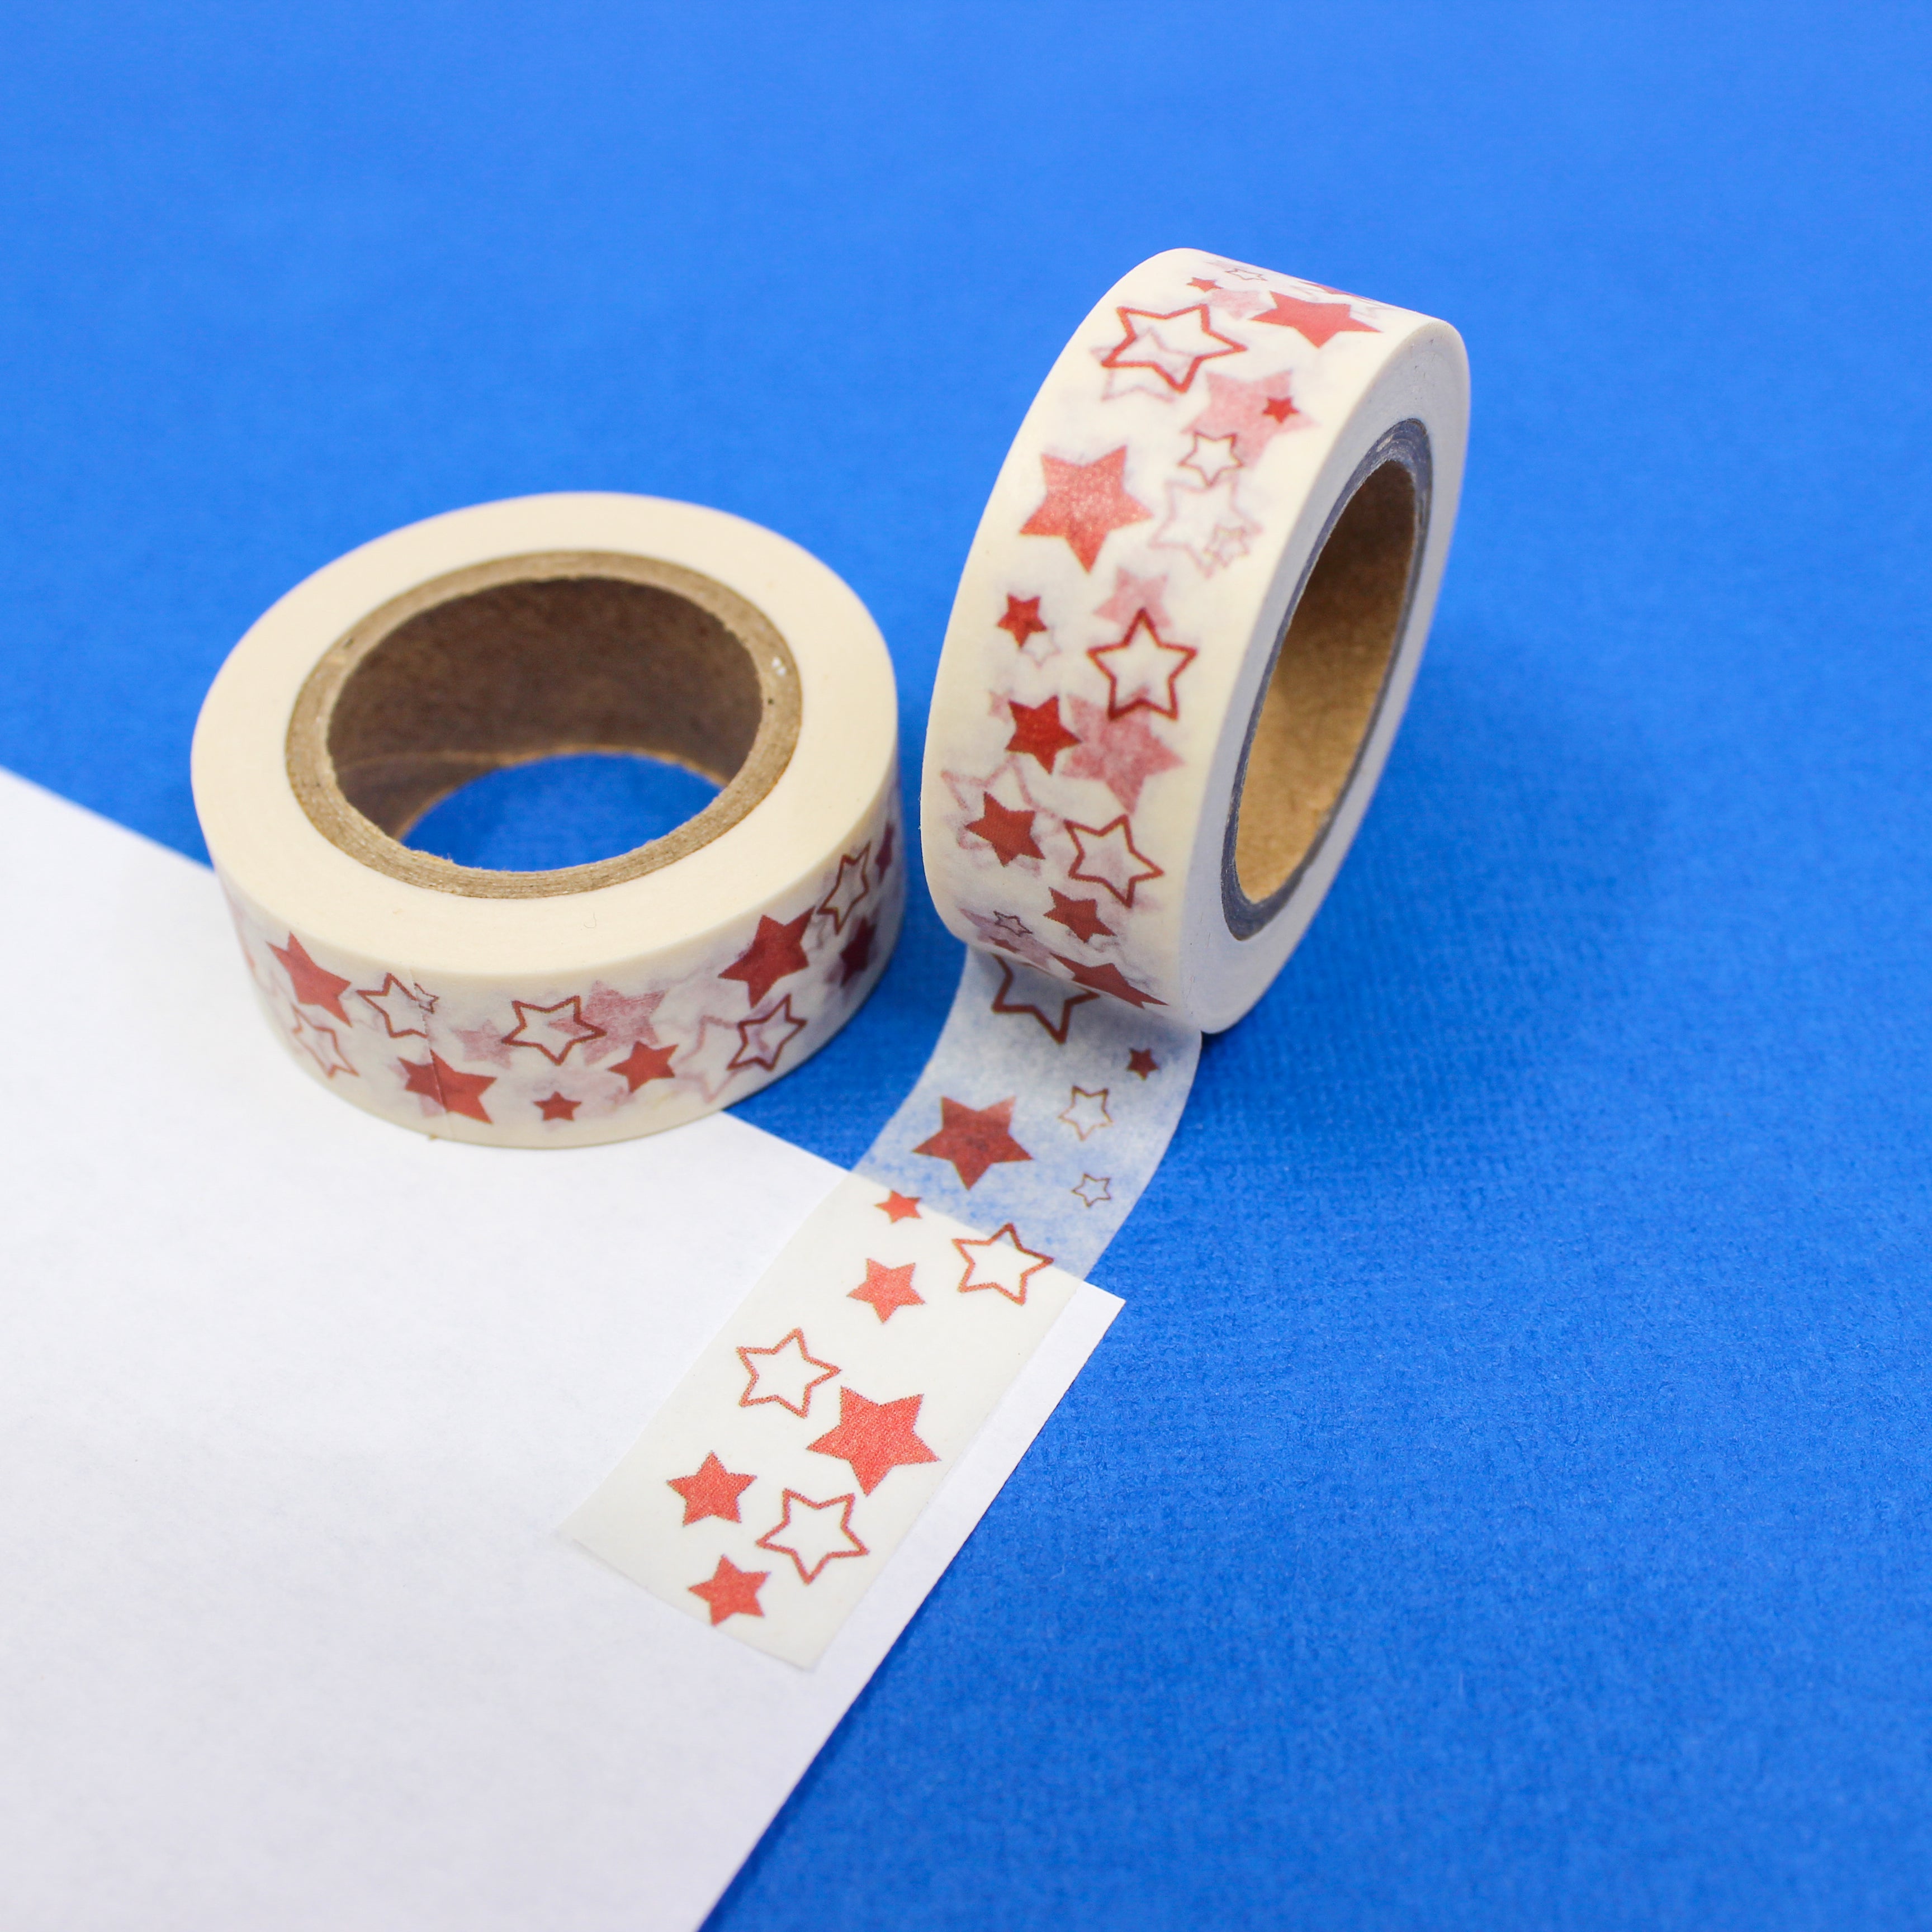 This is a red and white star pattern washi tape from BBB Supplies Craft Shop